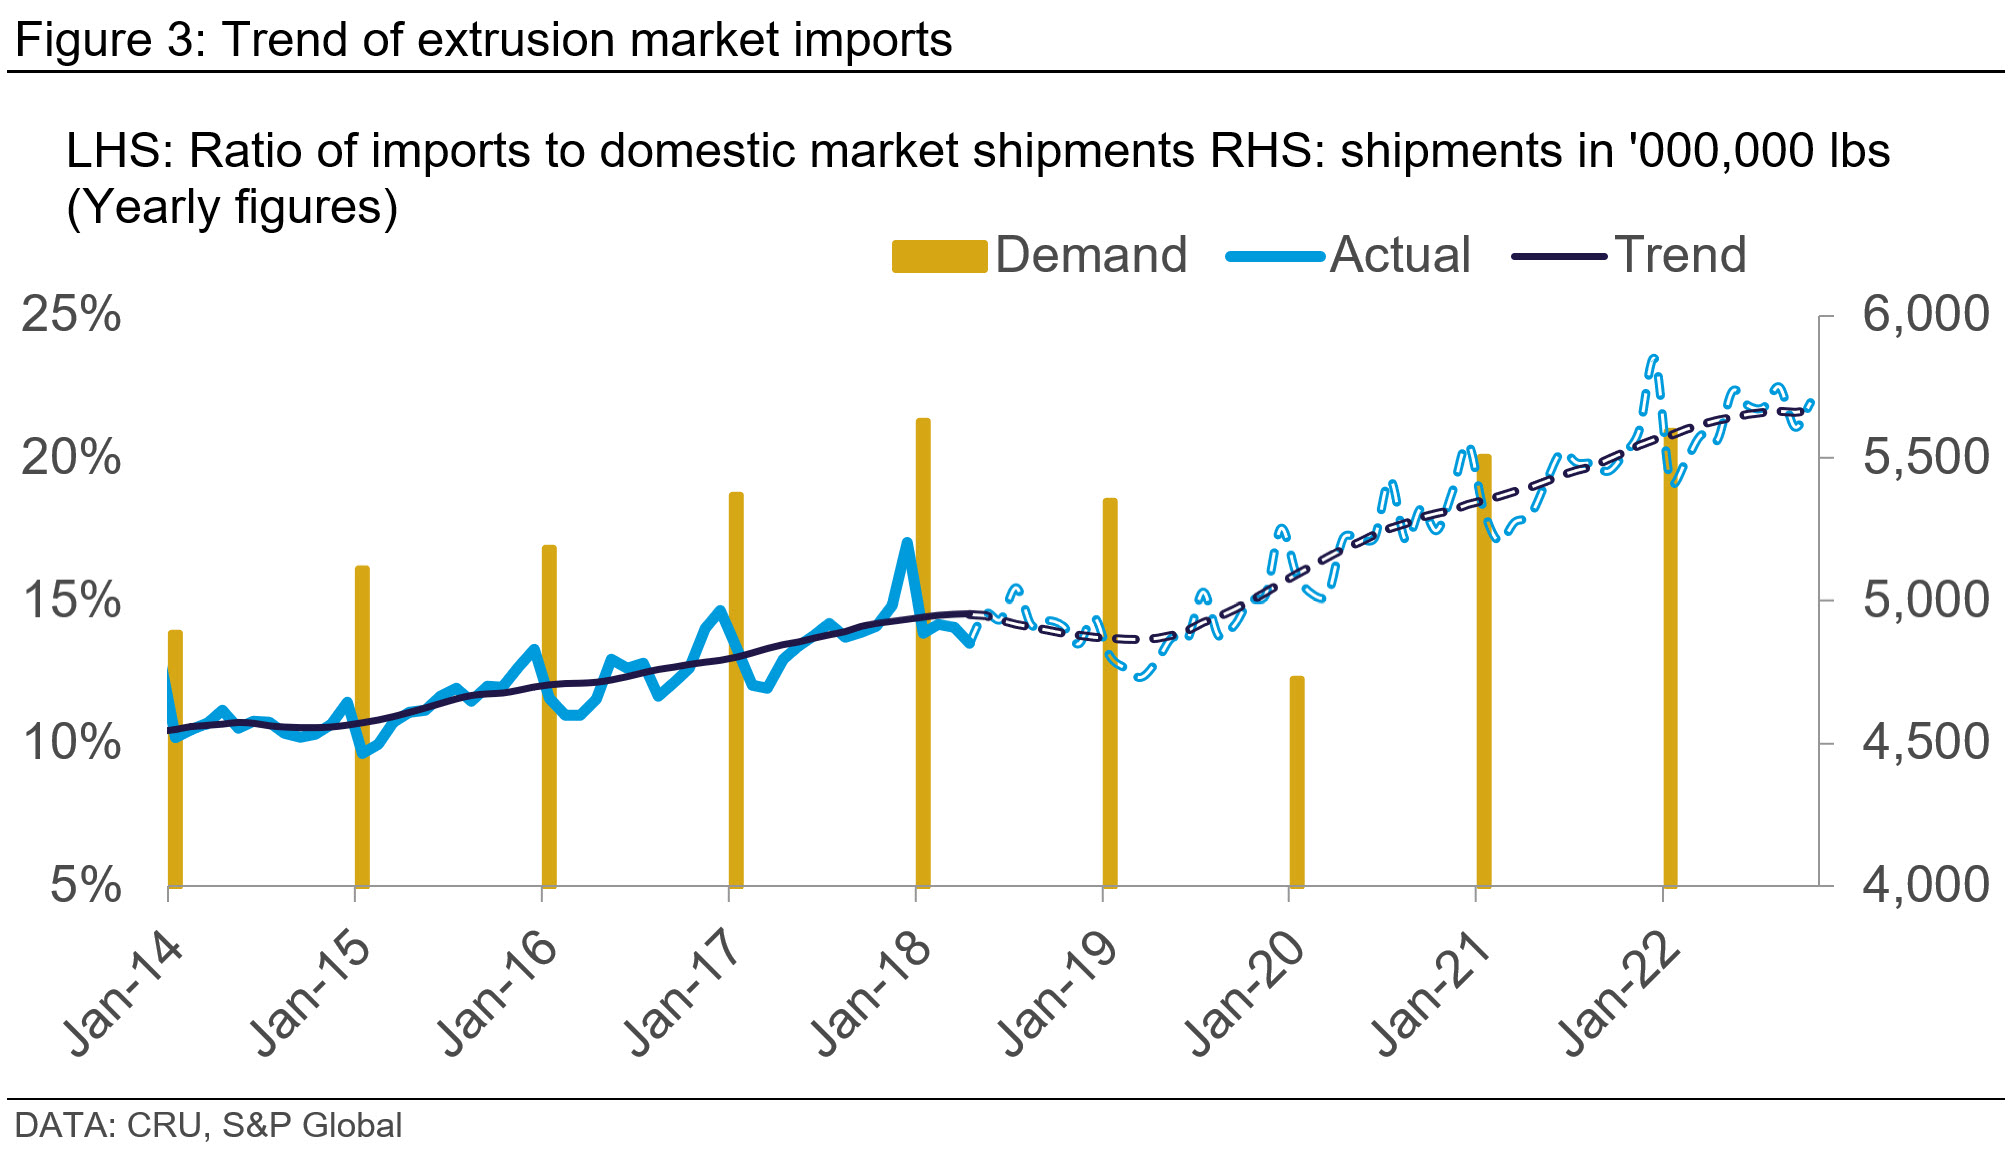 Graph showing the trend of extrusion market imports